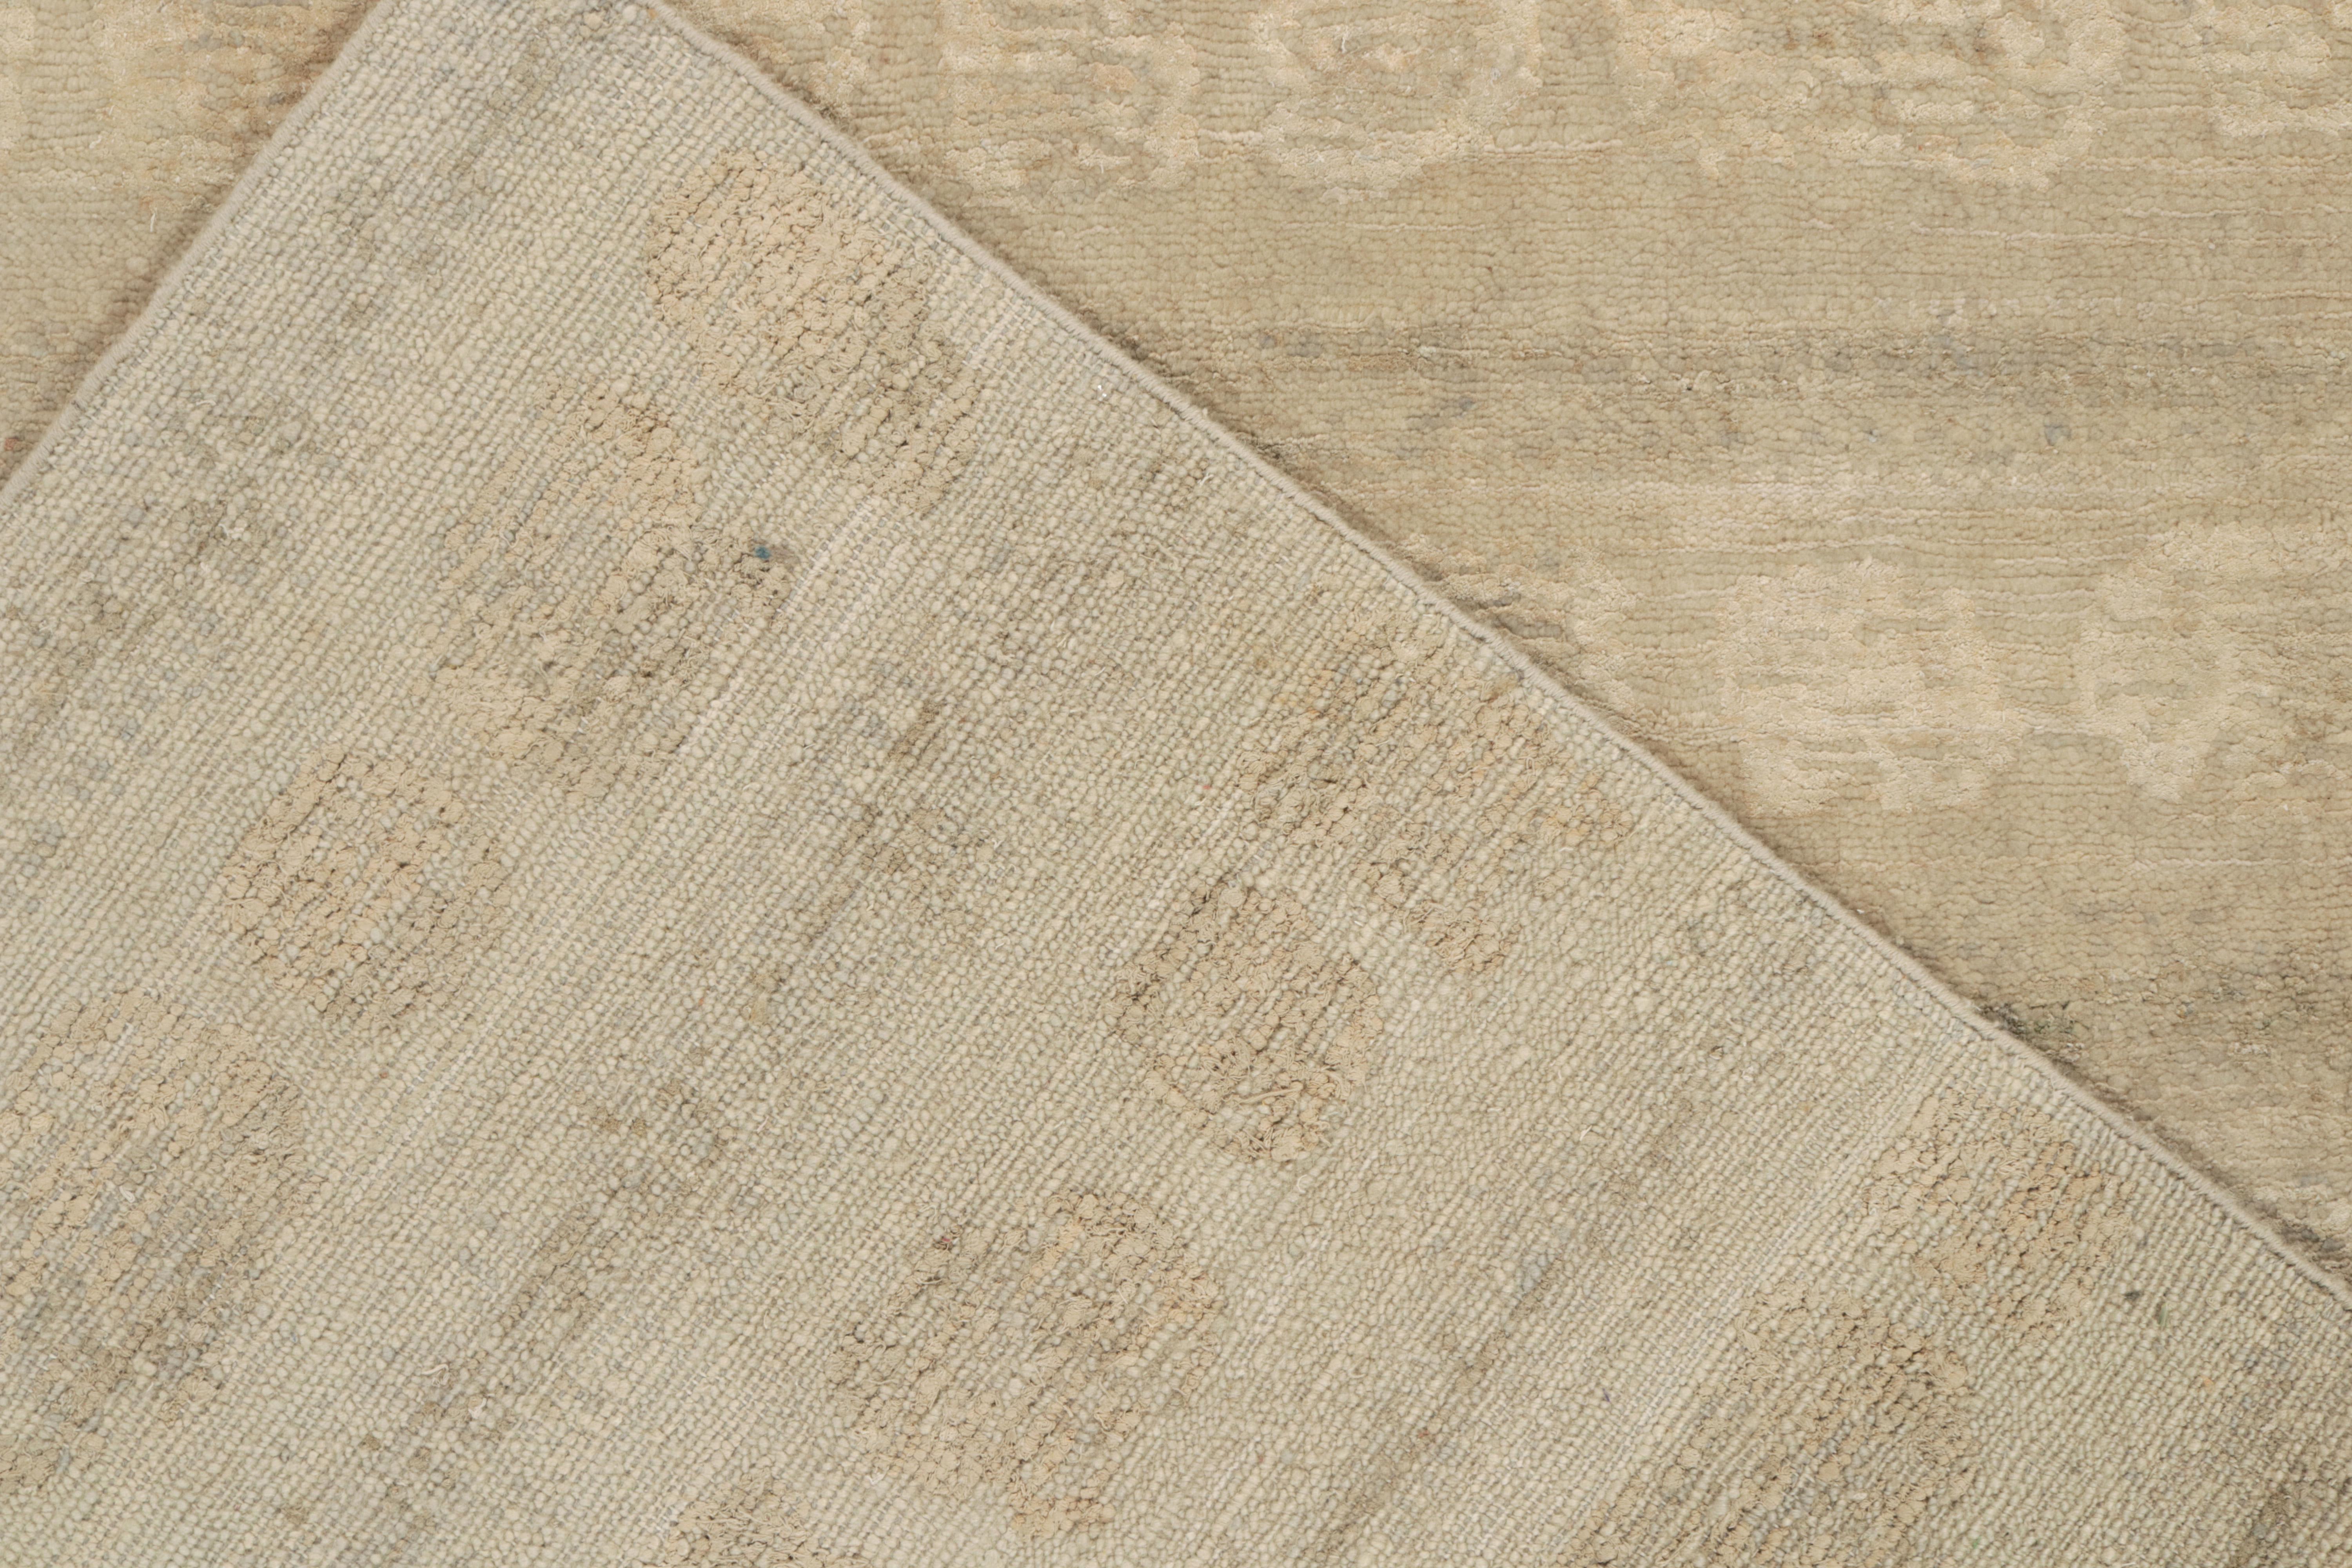 Rug & Kilim's Contemporary Rug in Beige & Grey Muted Stripes In Distressed Condition For Sale In Long Island City, NY